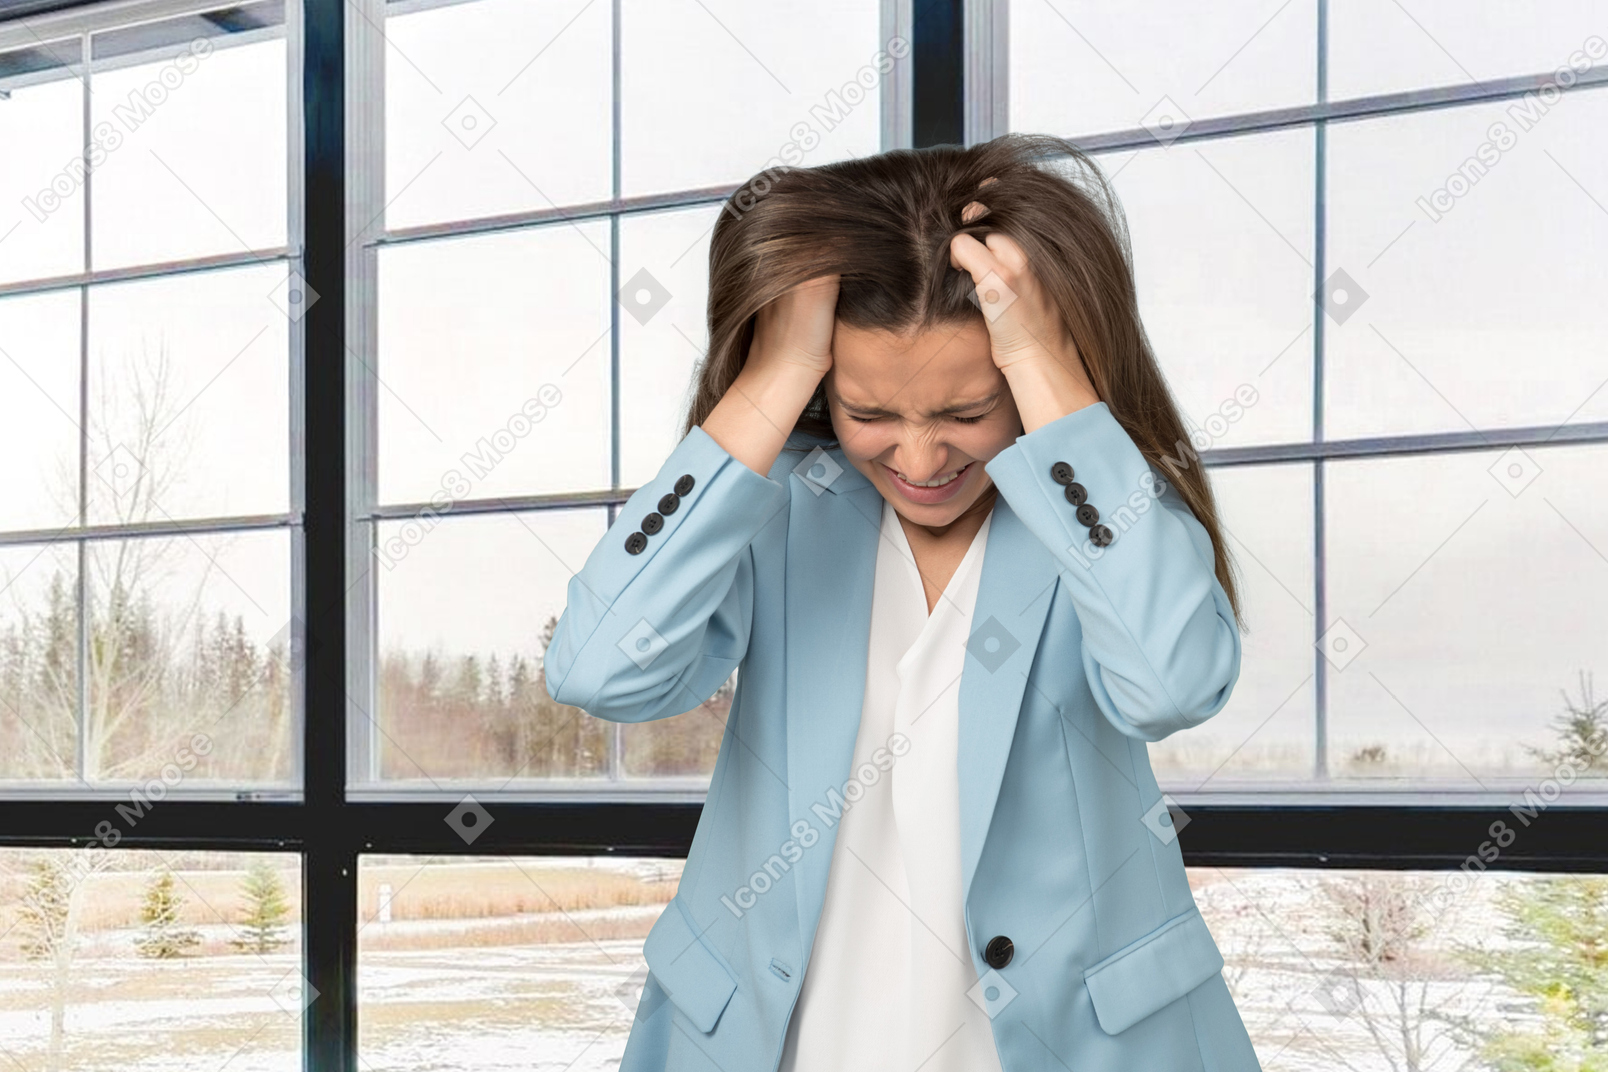 Angry woman pulling her hair